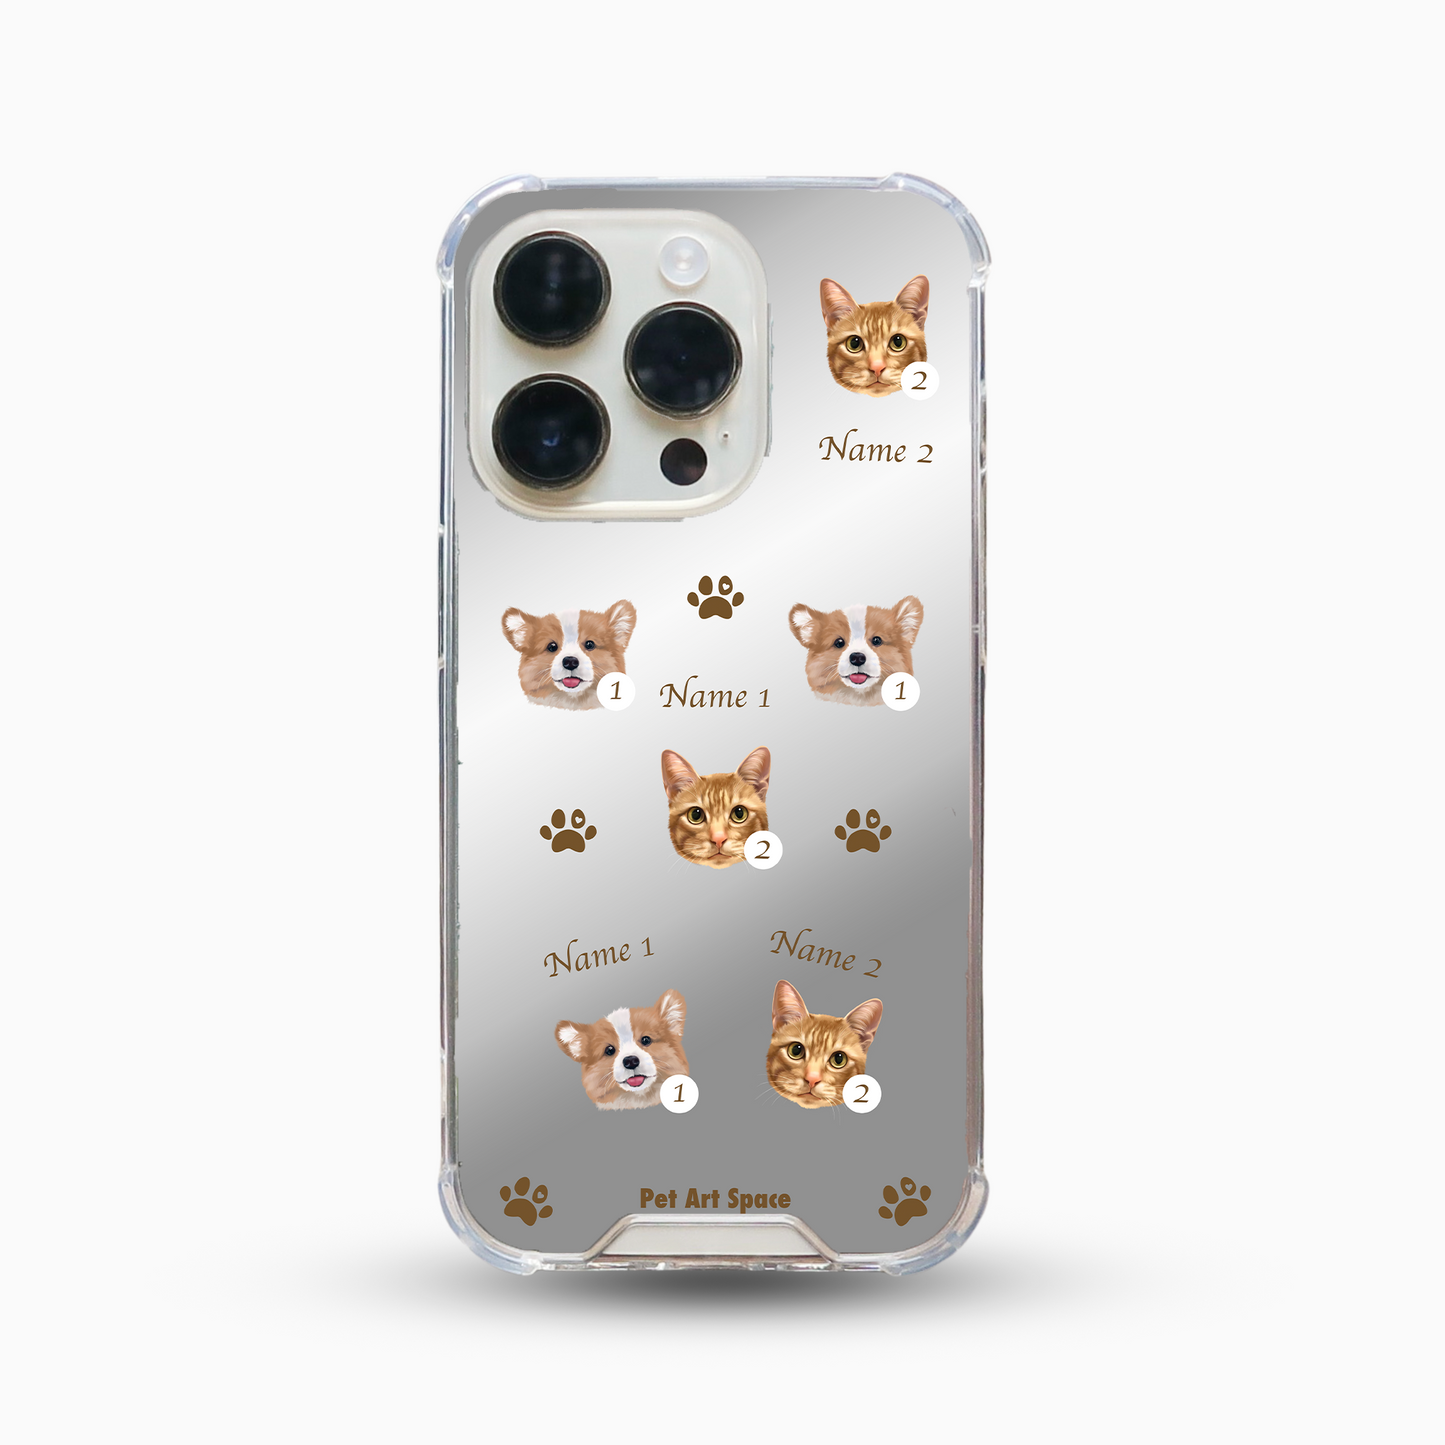 Paws A for 2 Pets - Mirror Case A